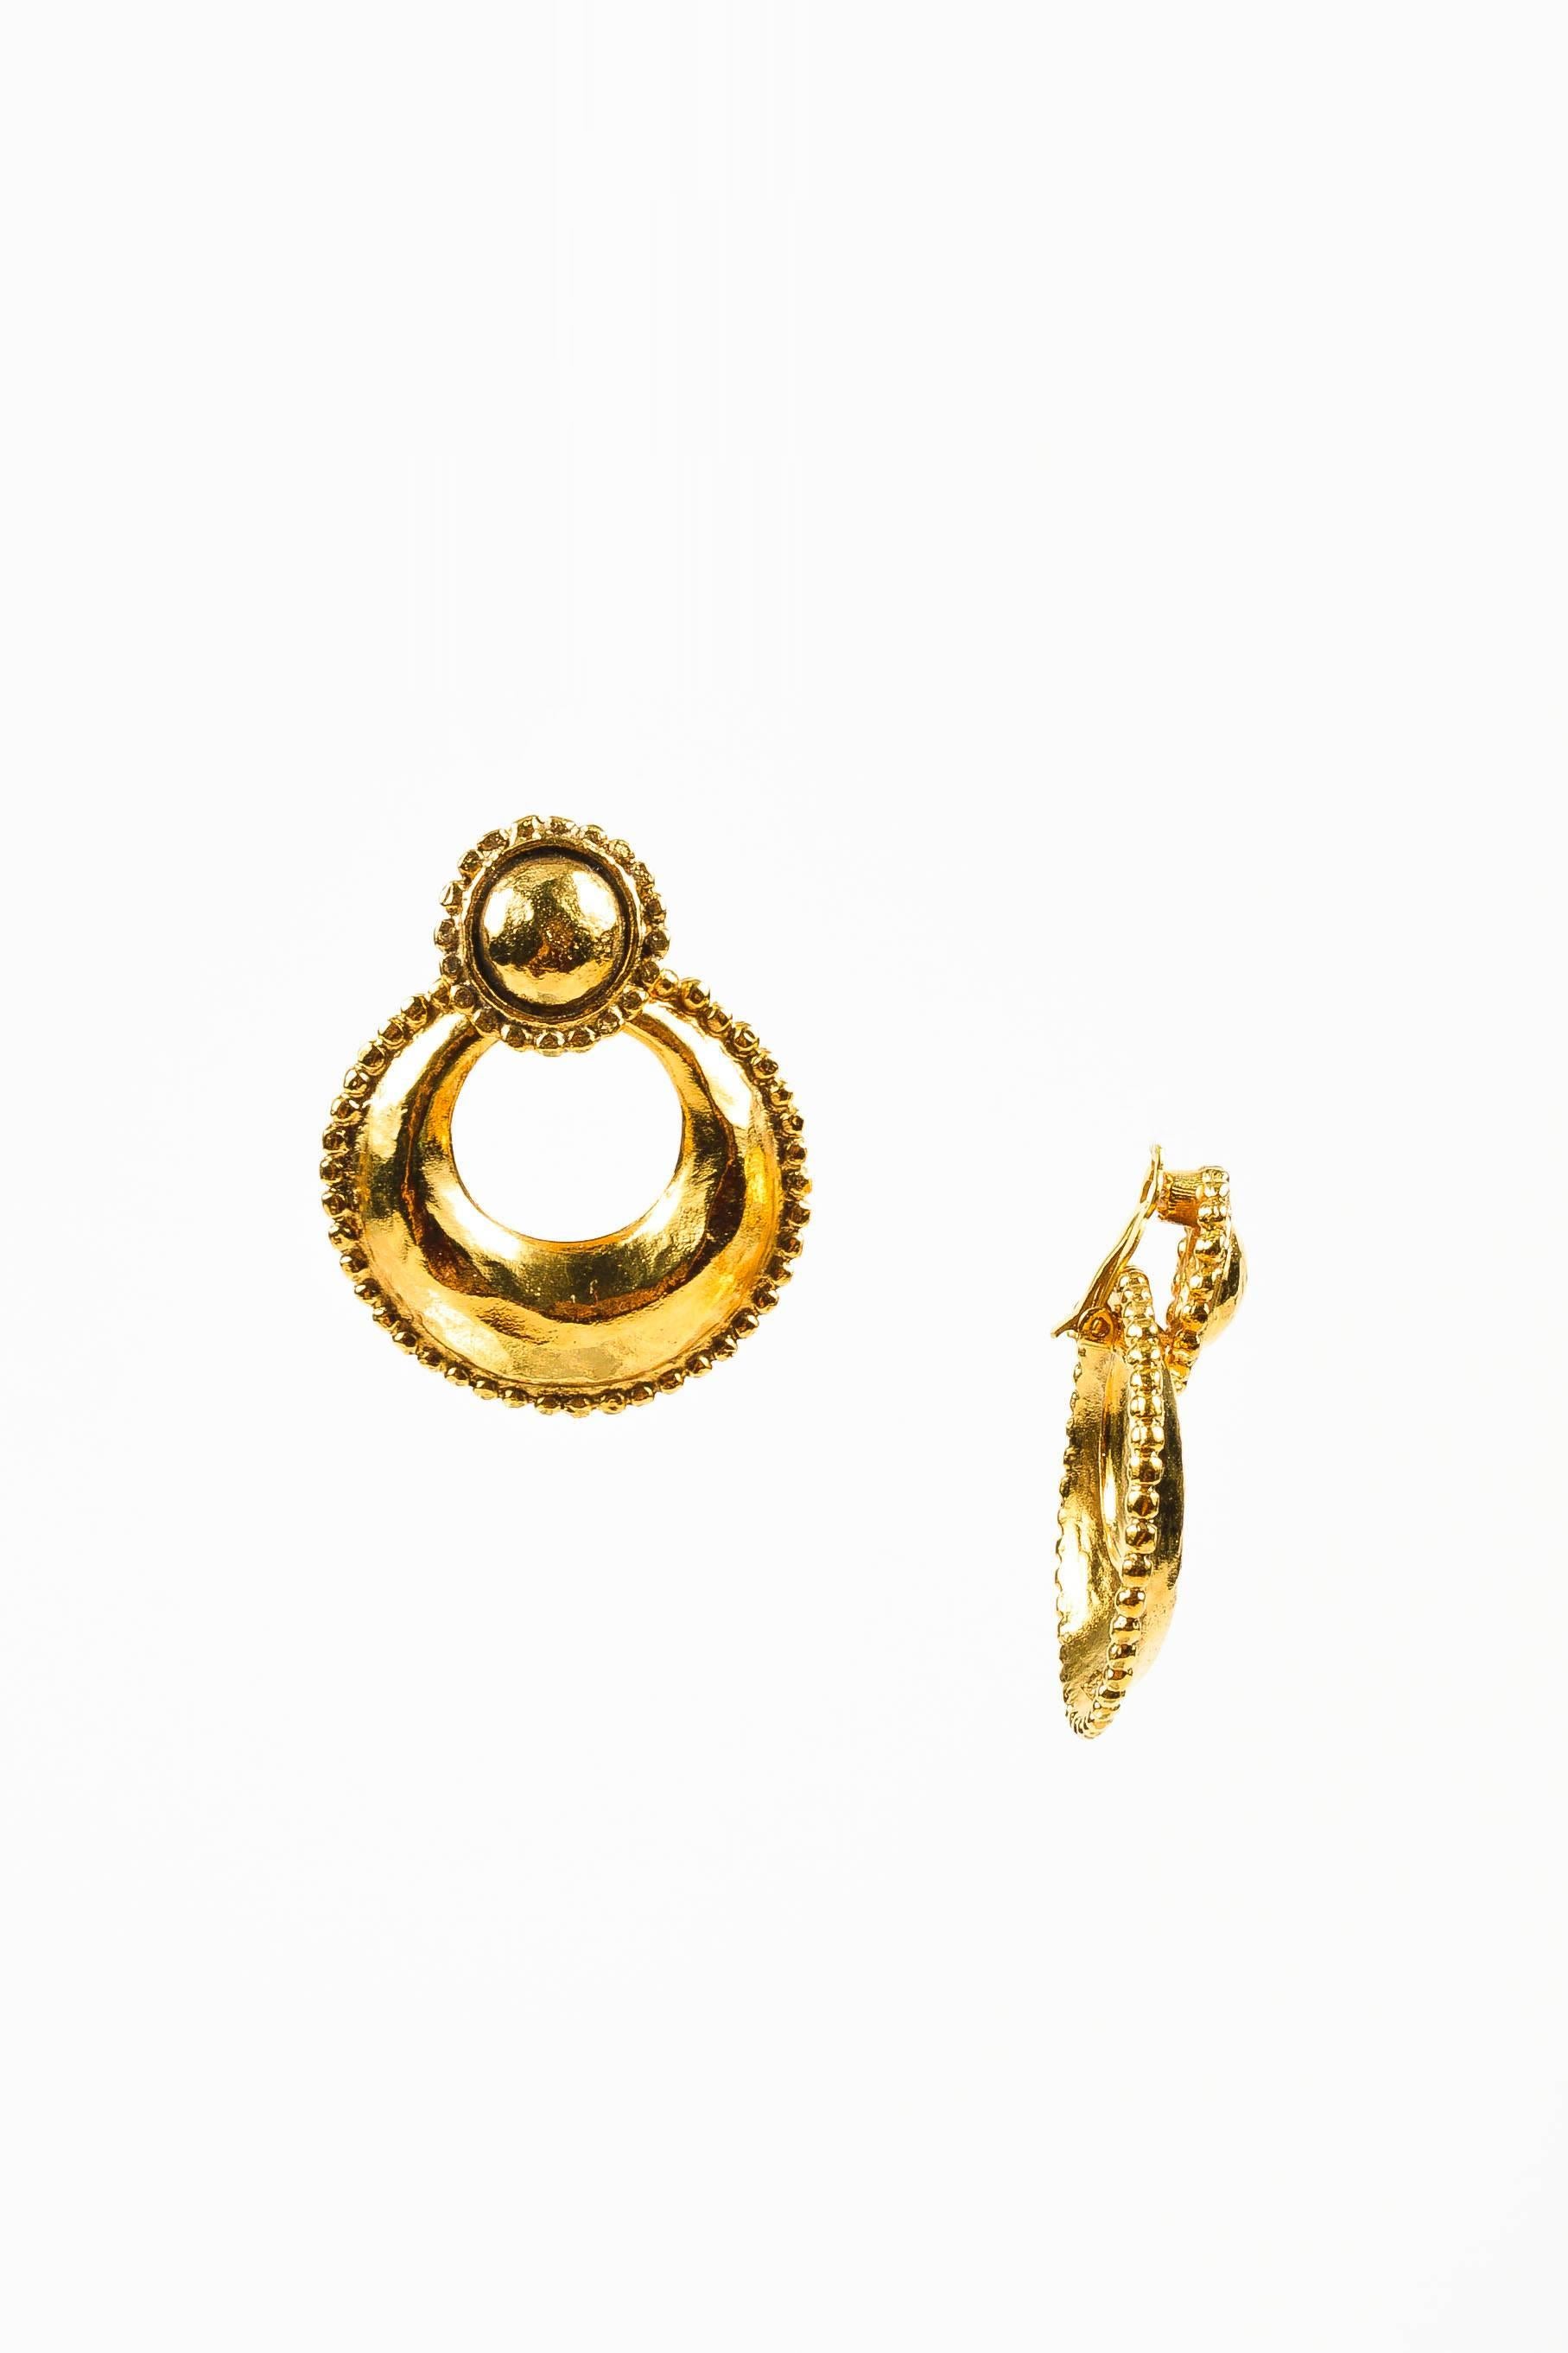 Vintage Chanel earrings from Collection 25, circa 1988. These baroque earrings are two styles in one. Circular buttons hold a dangling hoop that may be removed for a more understated look. Hammered gold tone metal with caviar textured border. Clip